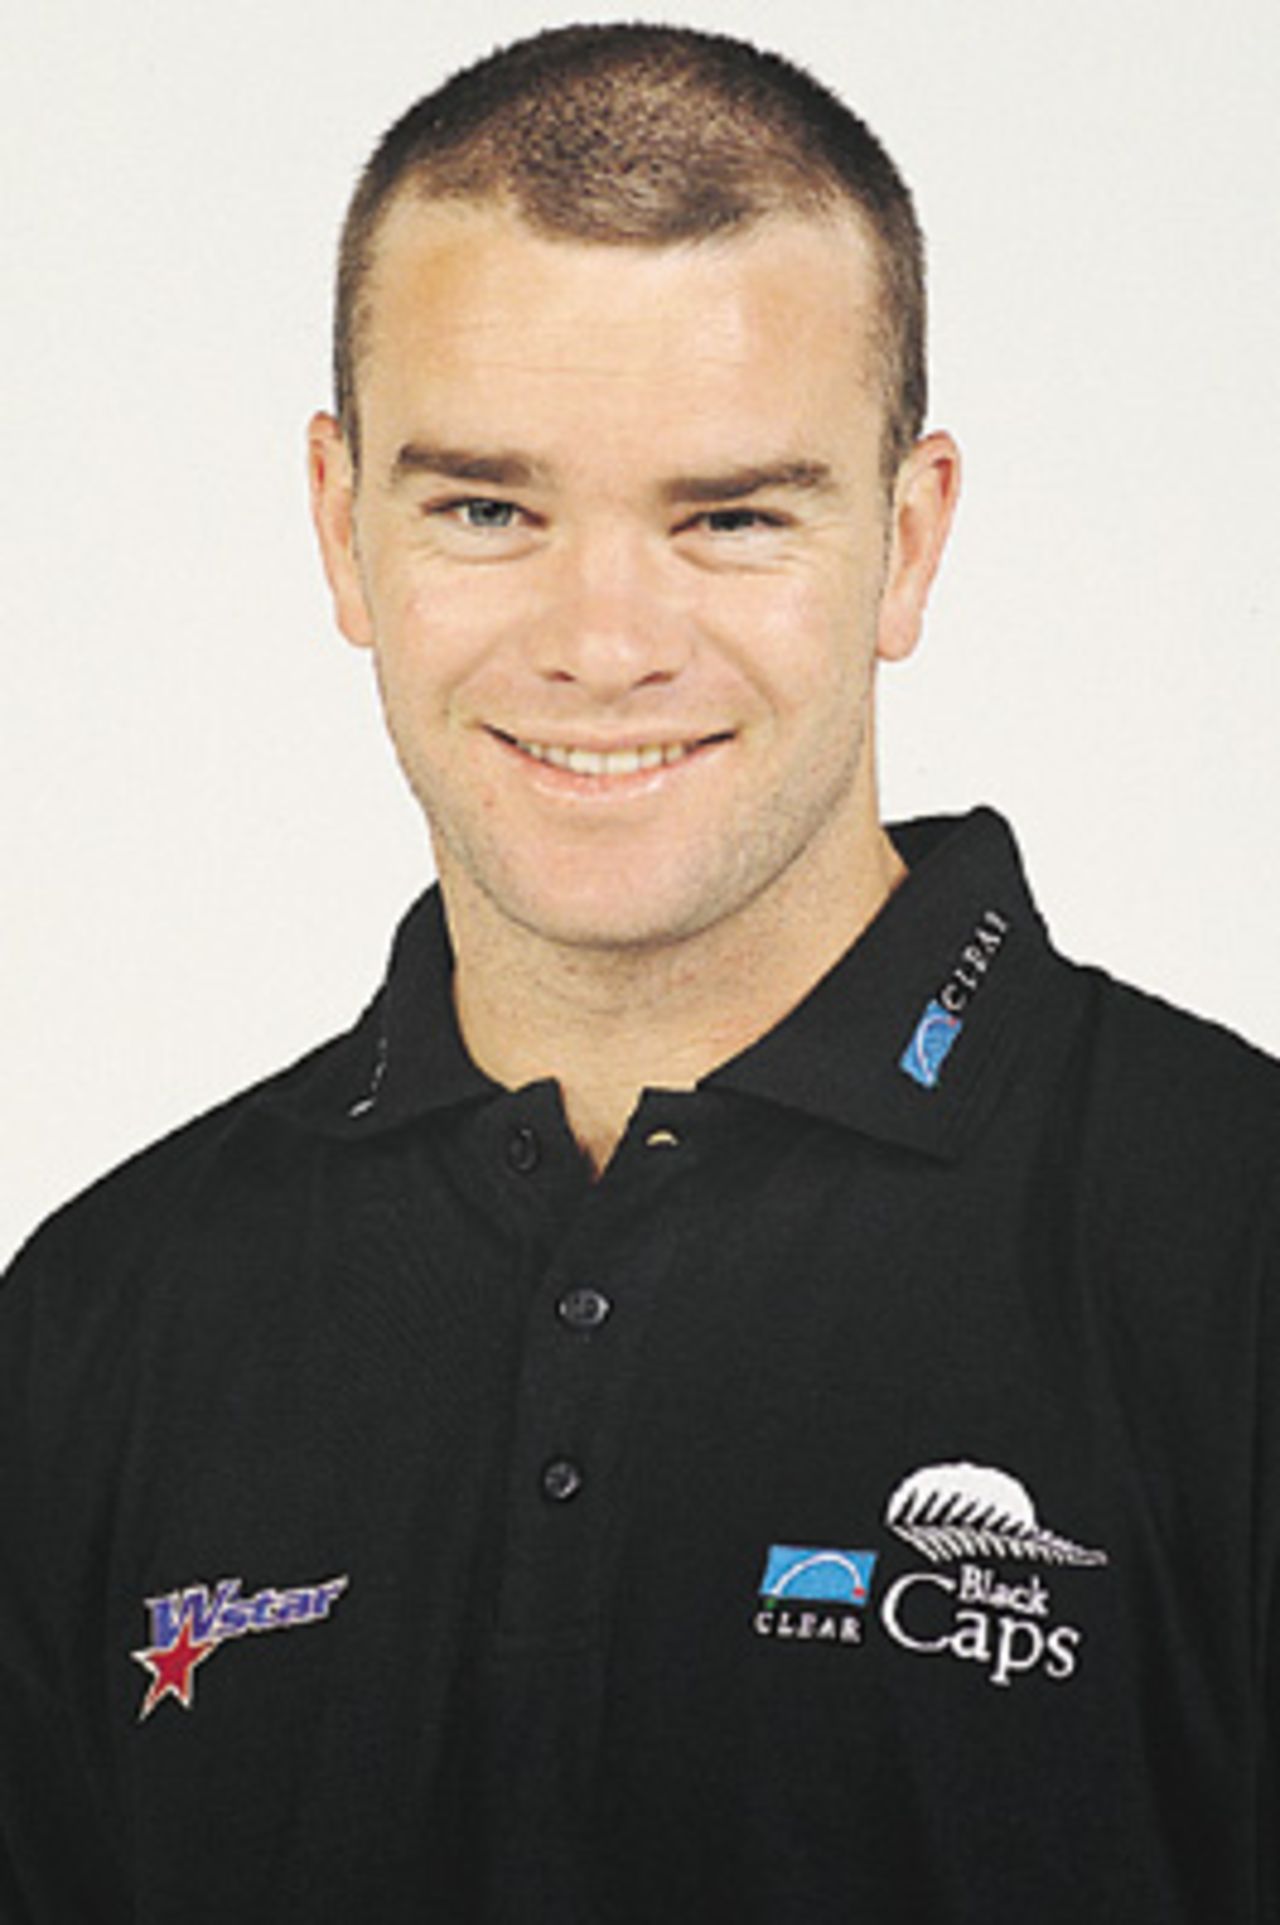 Portrait of Dion Nash - New Zealand player in the 2000/01 season